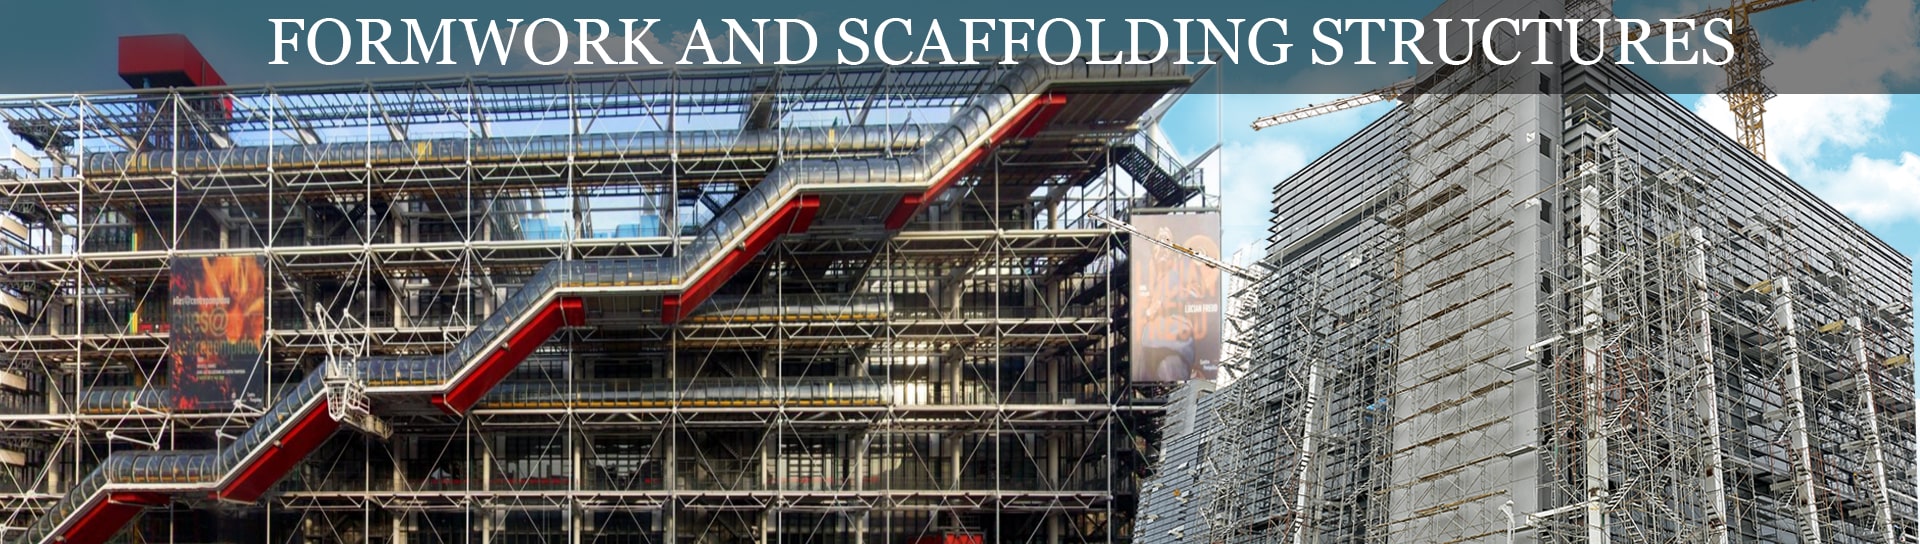 formwork and scaffolding structure